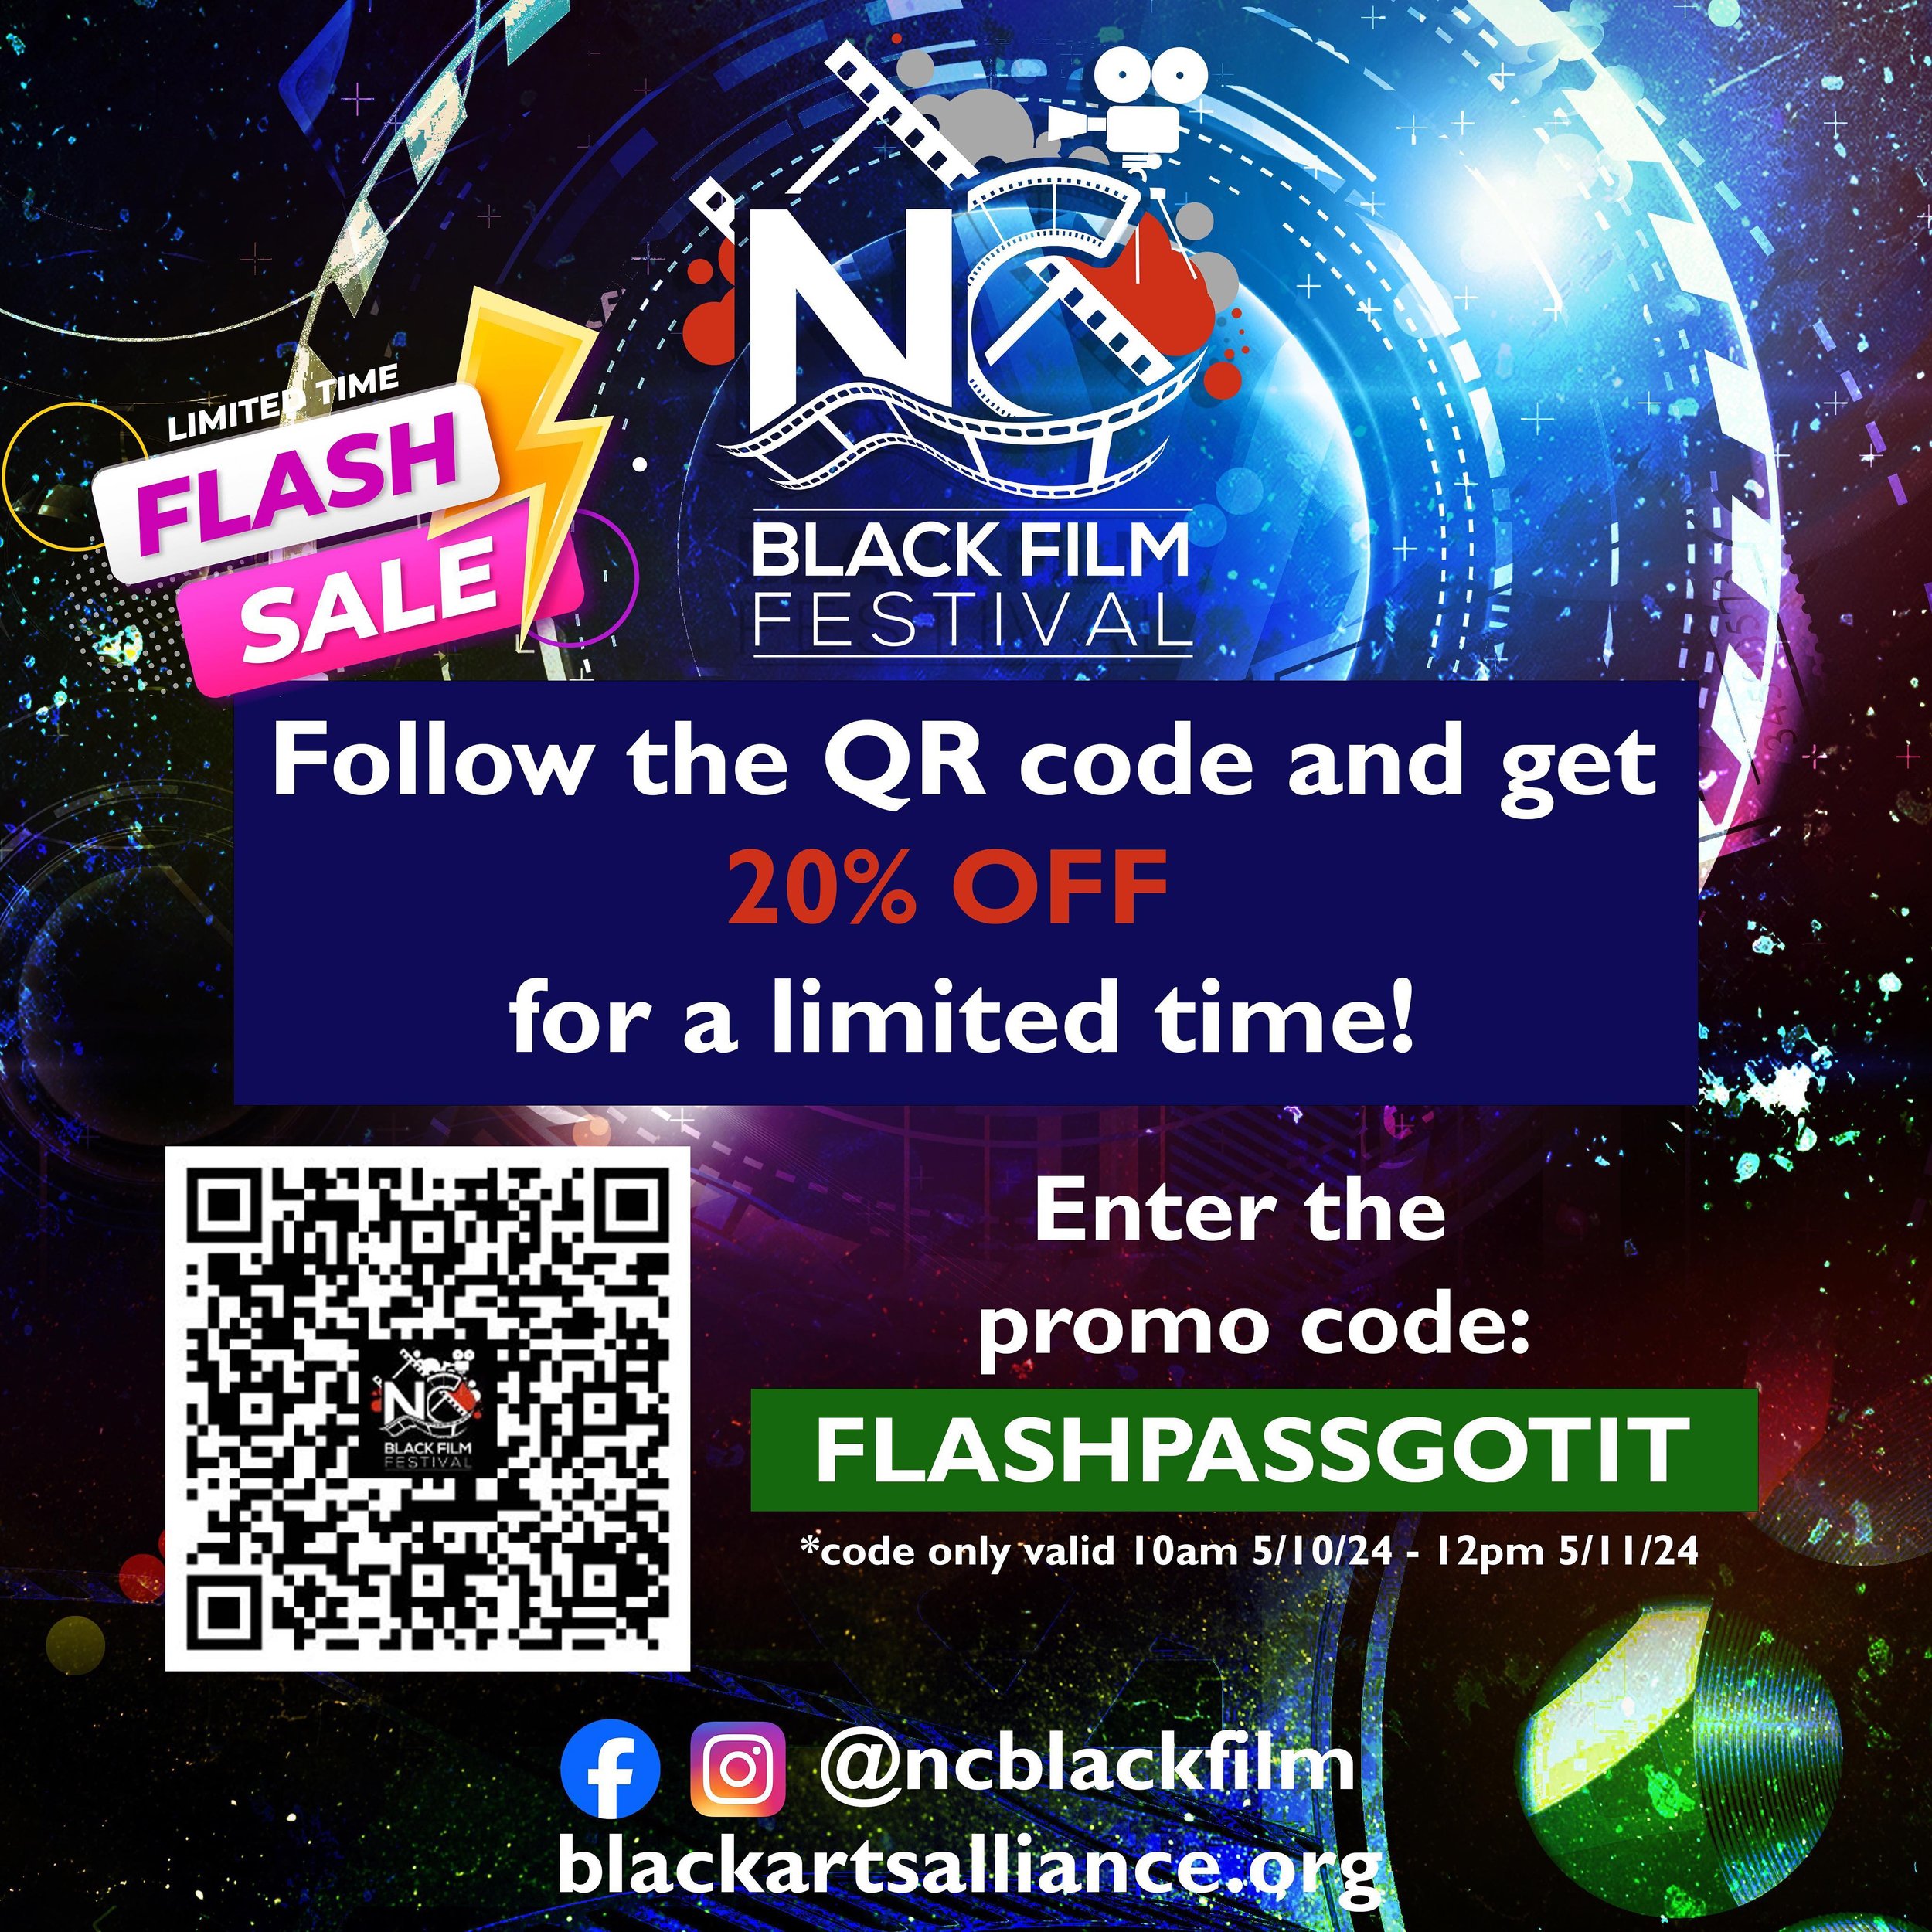 ⚡FLASH SALE⚡20% OFF ⚡FLASH SALE⚡20% OFF 

20% discount on passes for the RED CARPET PREMIERE package and the CINEMIXER/Opening Night for the NC Black Film Festival (@ncblackfilm). For the next 24 hours ONLY! 

Go to Eventbrite (link in bio) or scan t